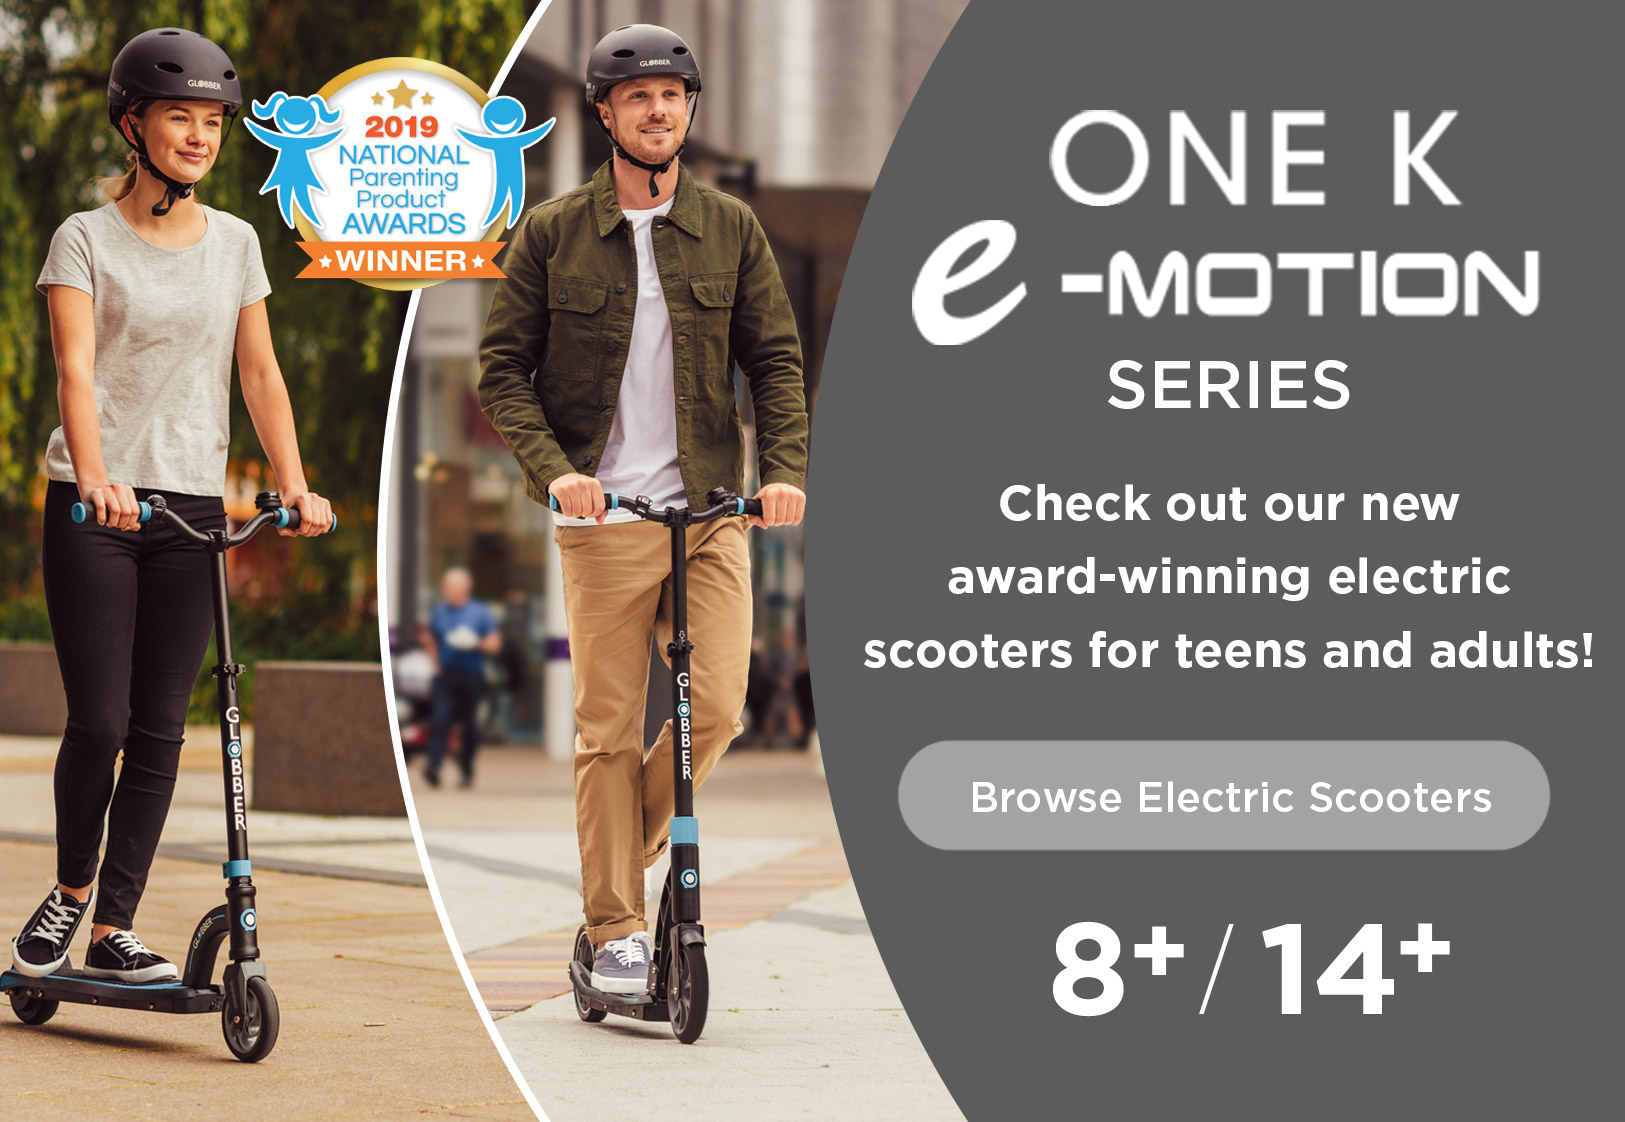 Globber-ONE-K-E-MOTION-award-winning-electric-scooters-for-teens-and-adults